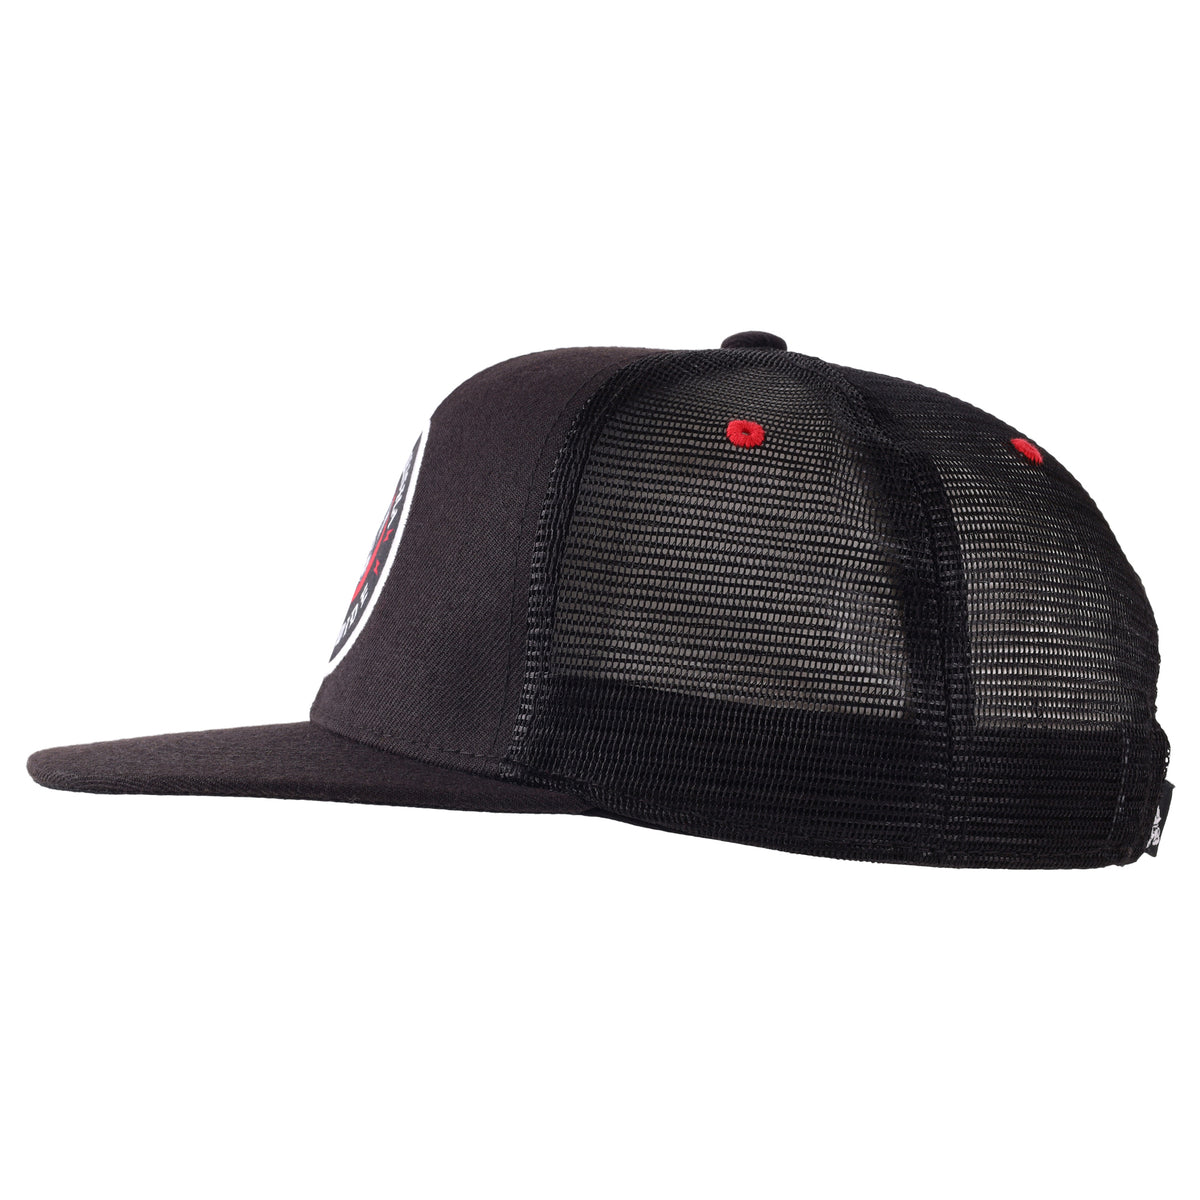 FLIPPED OUT SNAPBACK HAT